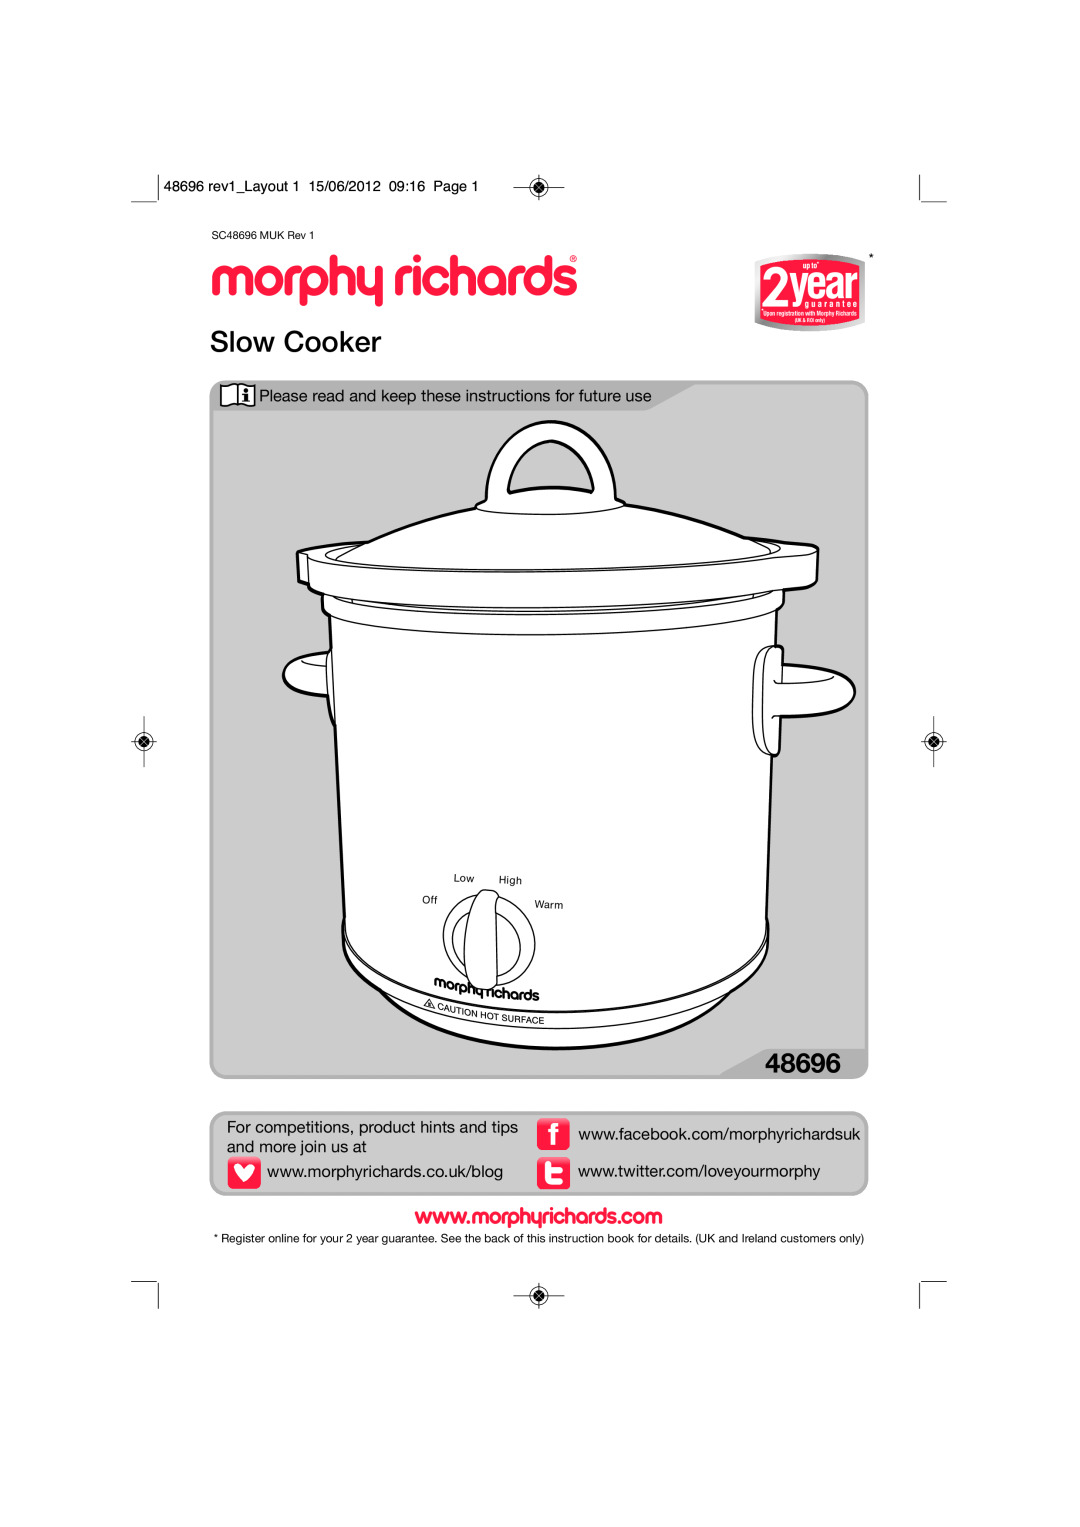 Morphy Richards SC48696 manual Slow Cooker, 48696 rev1 Layout 1 15/06/2012 09 16 Page, UK & ROI only 